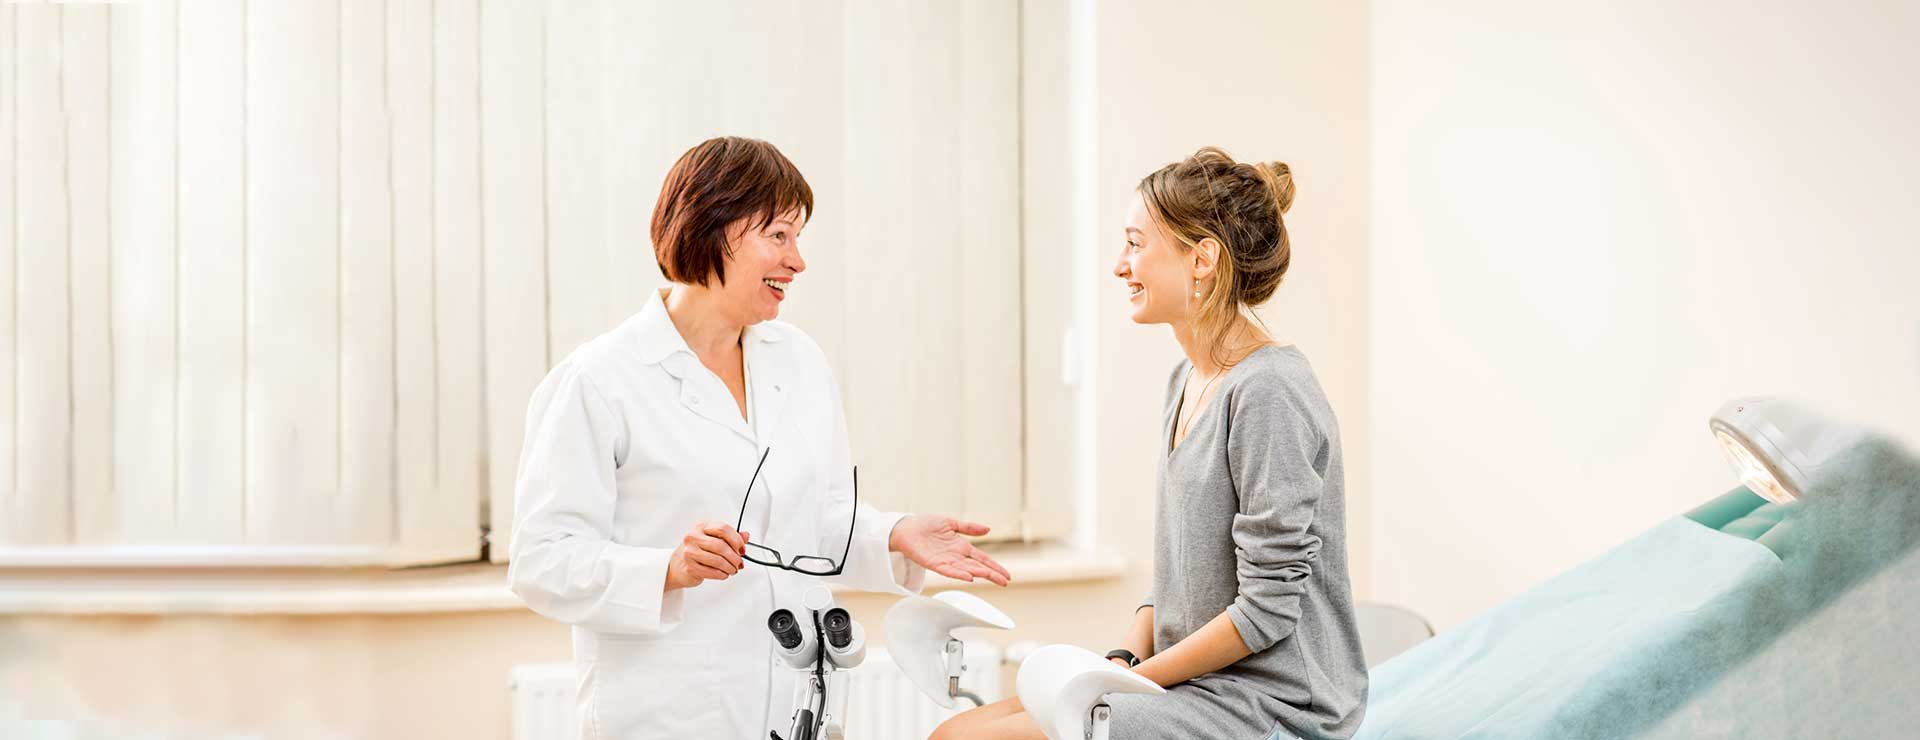 7 Things You Should Always Discuss with Your Gynecologist Johns Hopkins Medicine